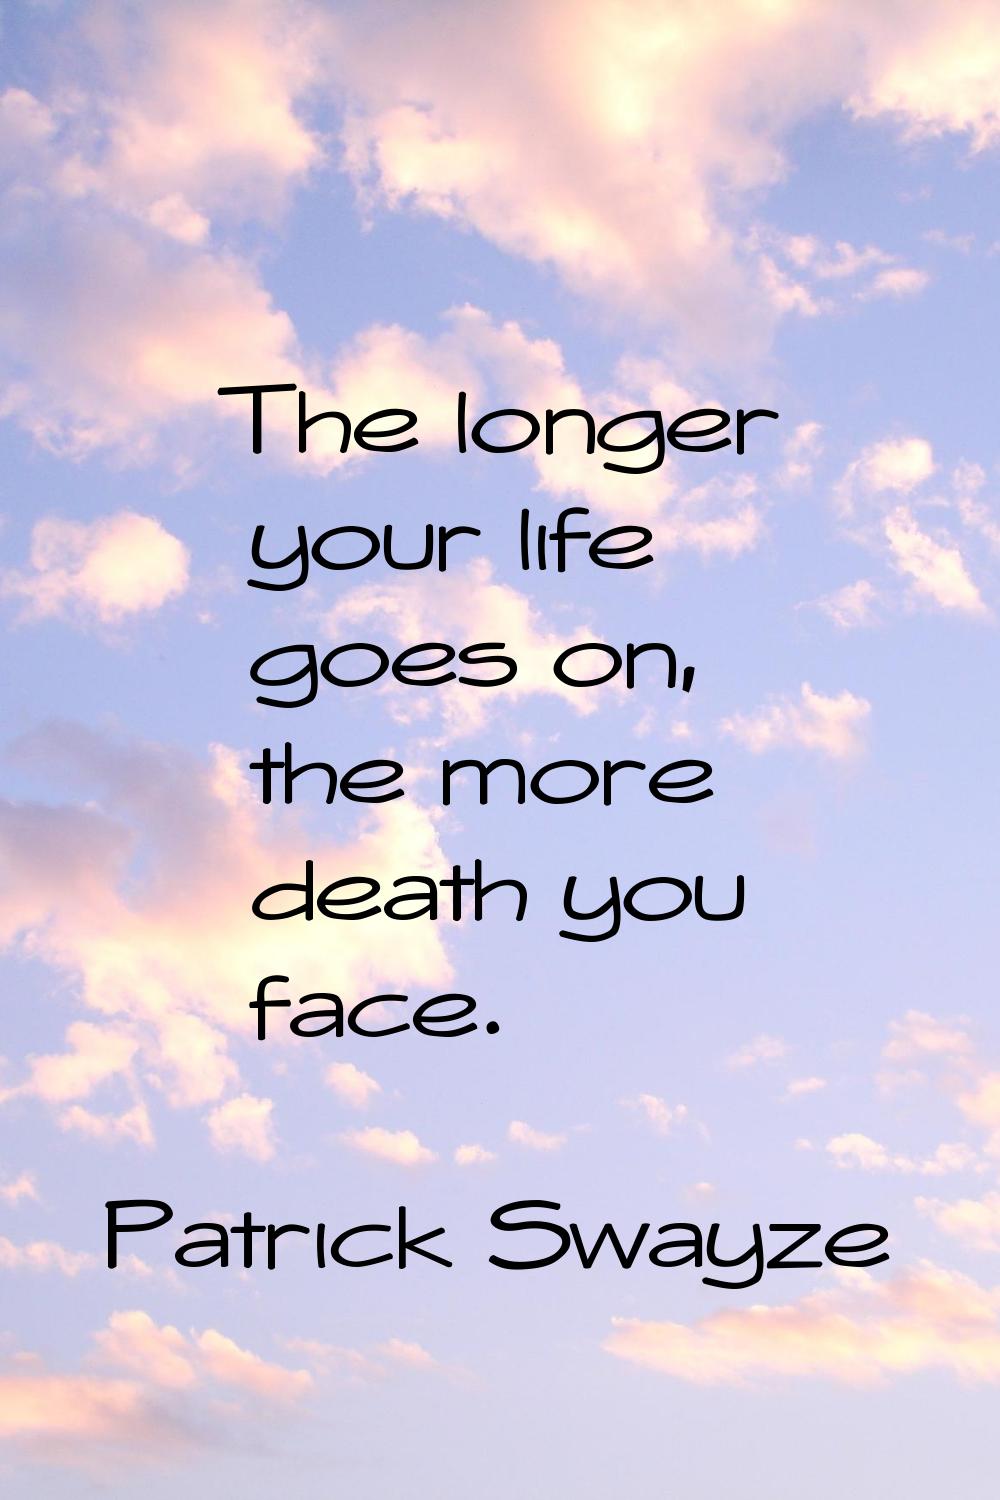 The longer your life goes on, the more death you face.